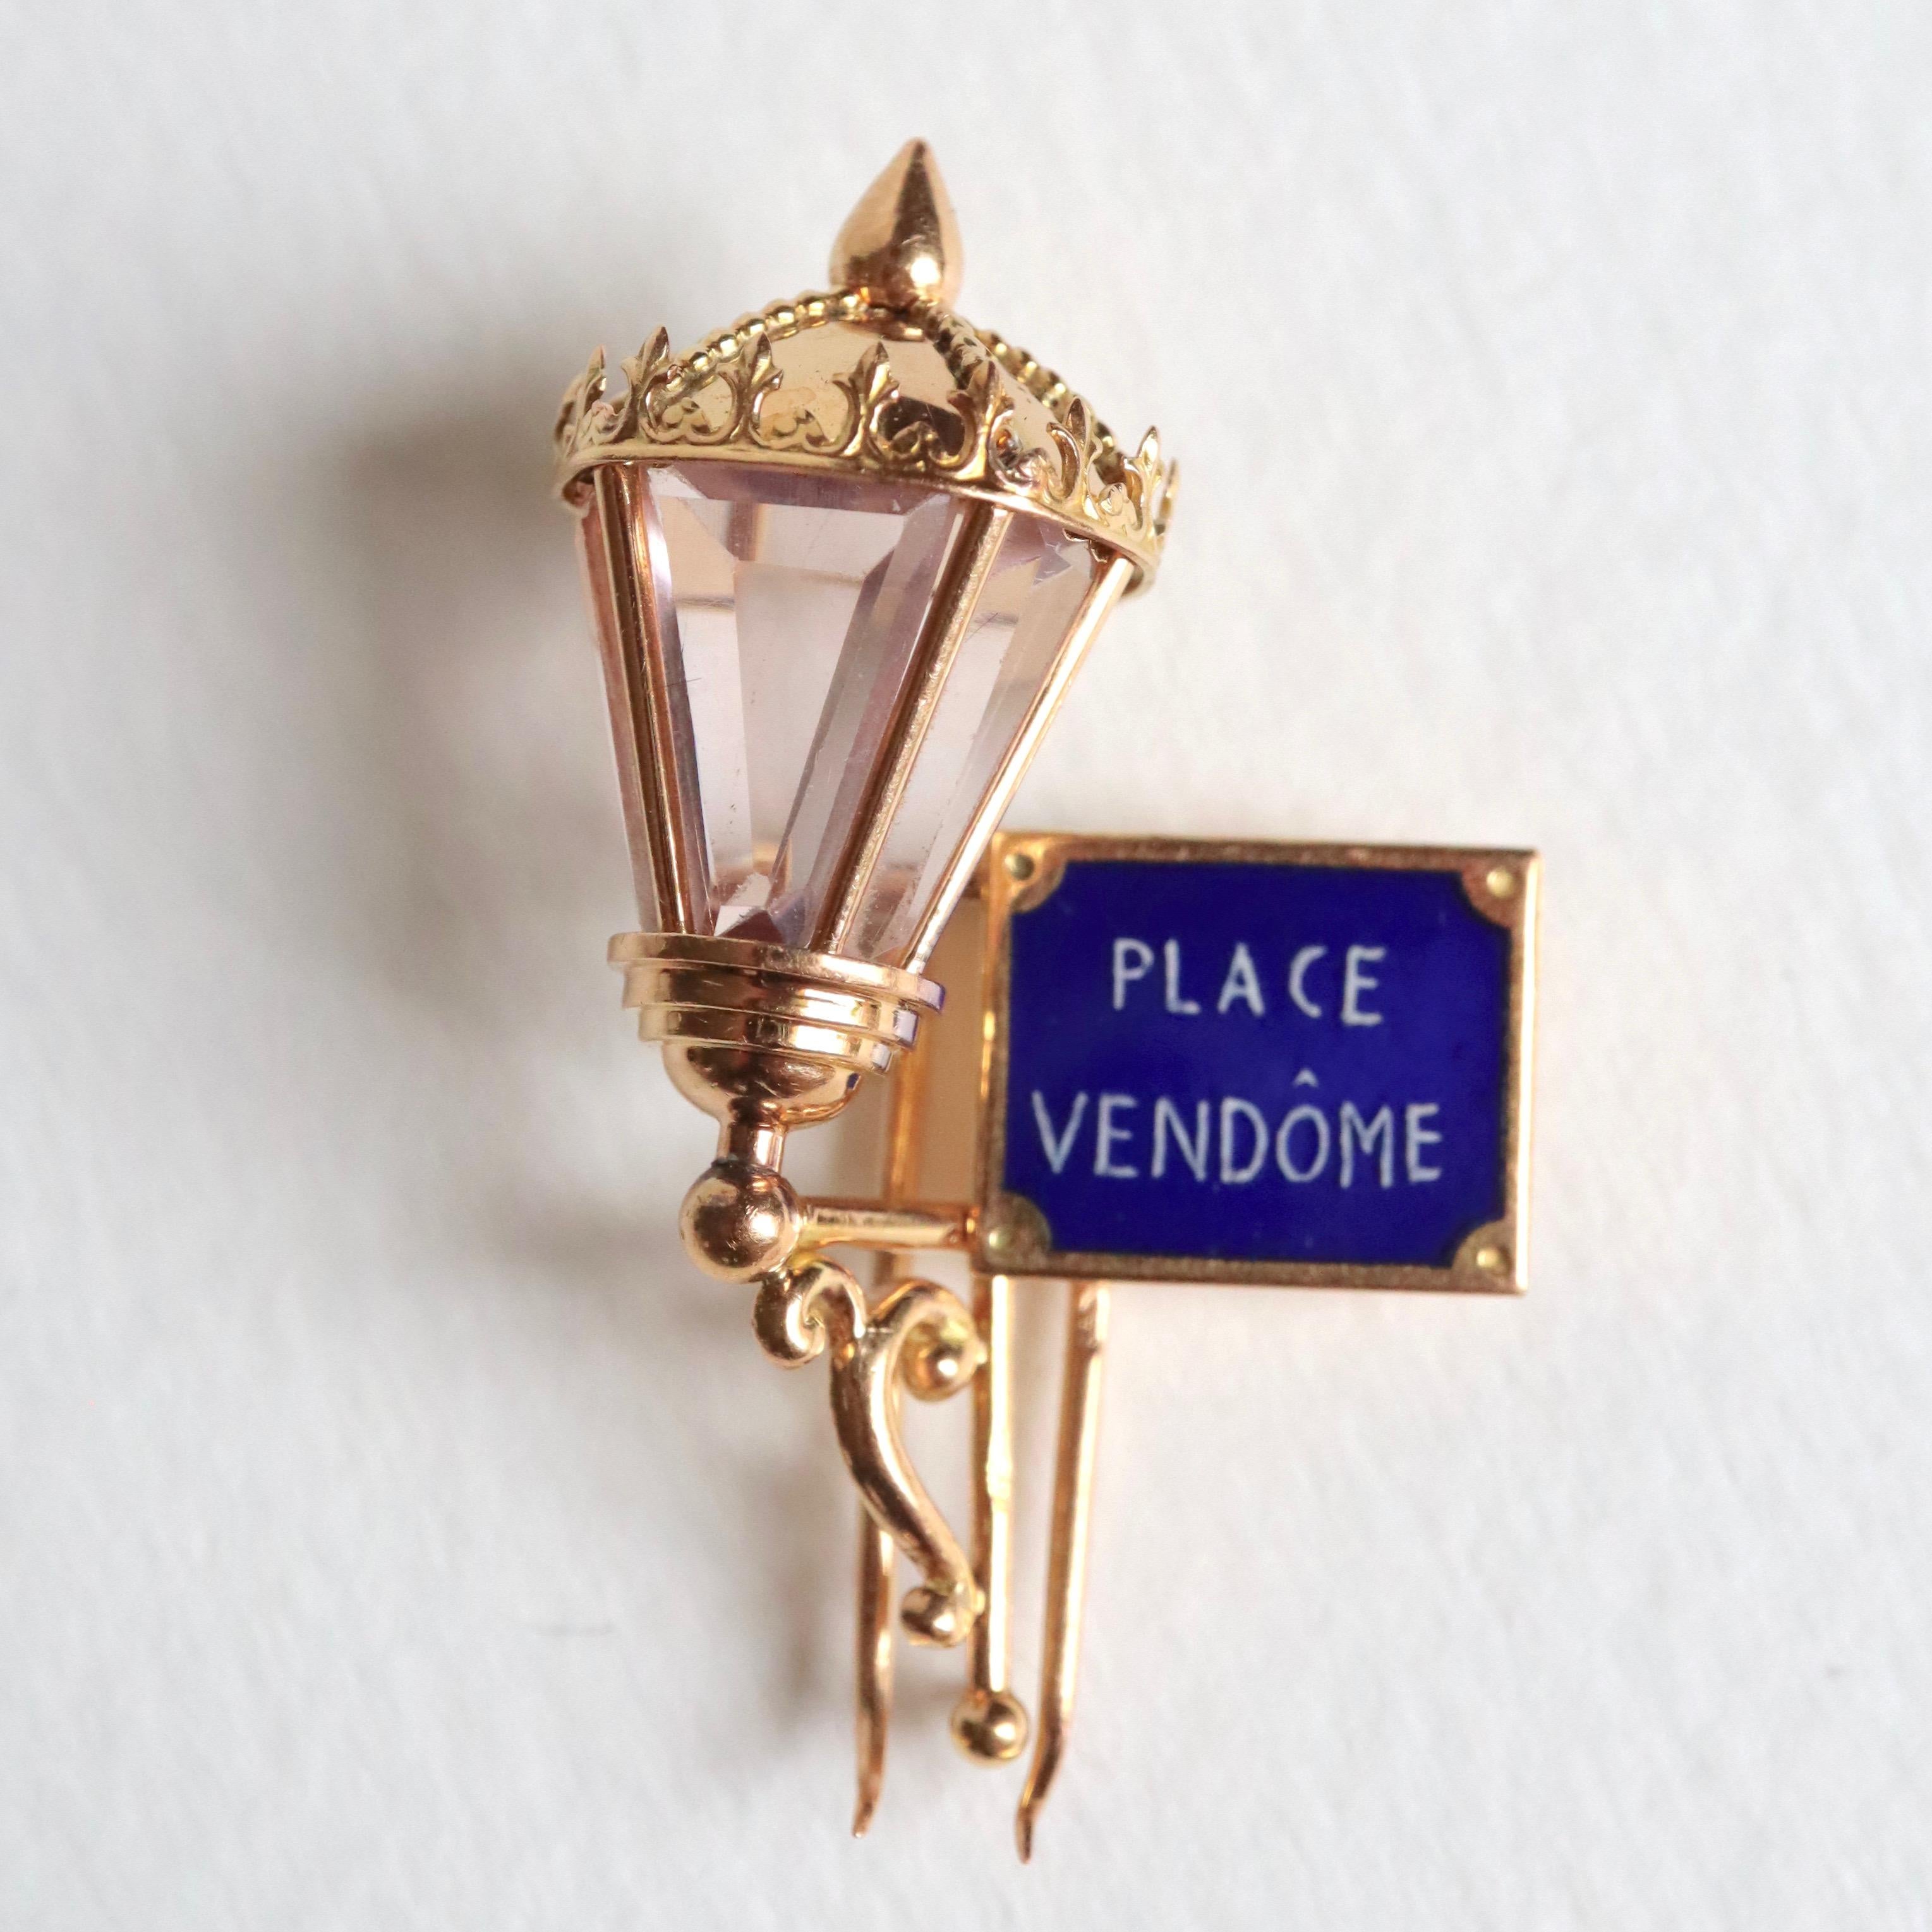 MAUBOUSSIN Place Vendôme Lapel Clip in 18 Carat yellow Gold and Enamel around 1950
Maison MAUBOUSSIN reverse Cuff in 18 Kt yellow Gold depicting a Lantern with the Plaque of the Vendôme Place Enamelled in White on a Blue Background. 3 beveled